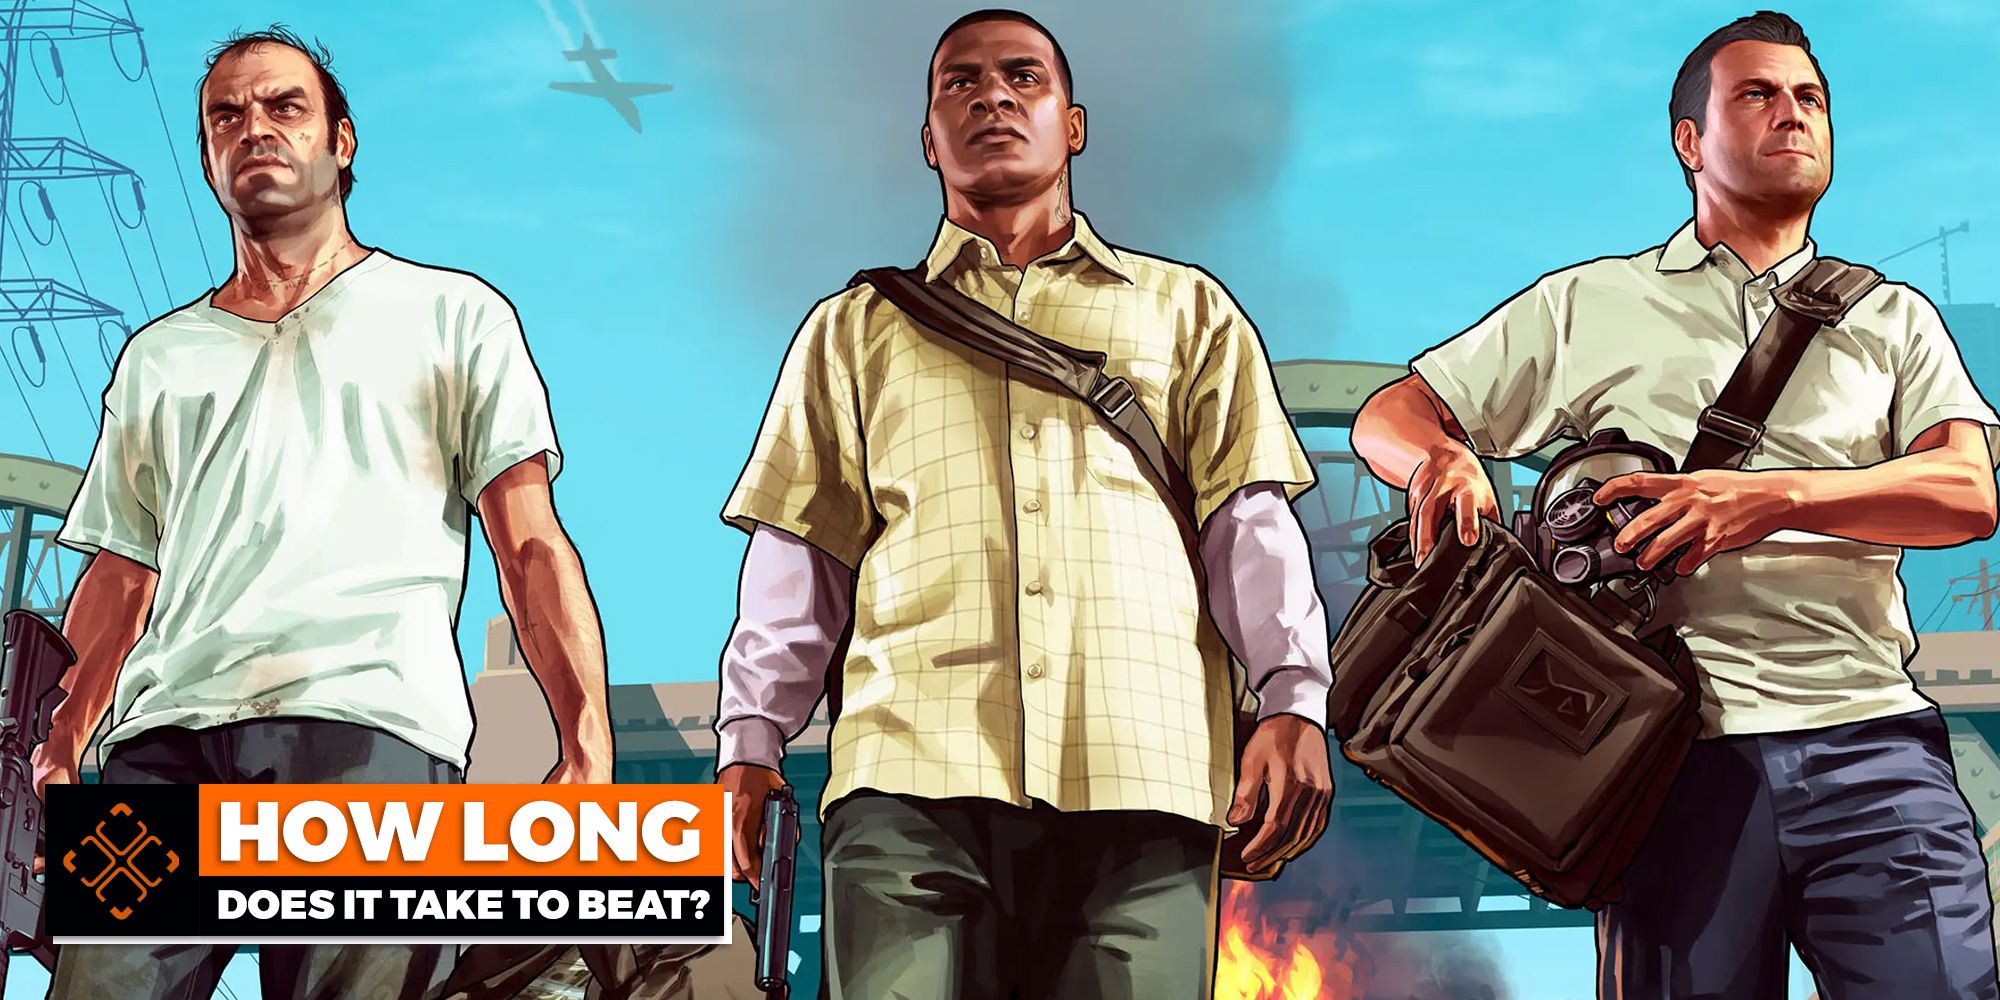 Game art from Grand Theft Auto 5.